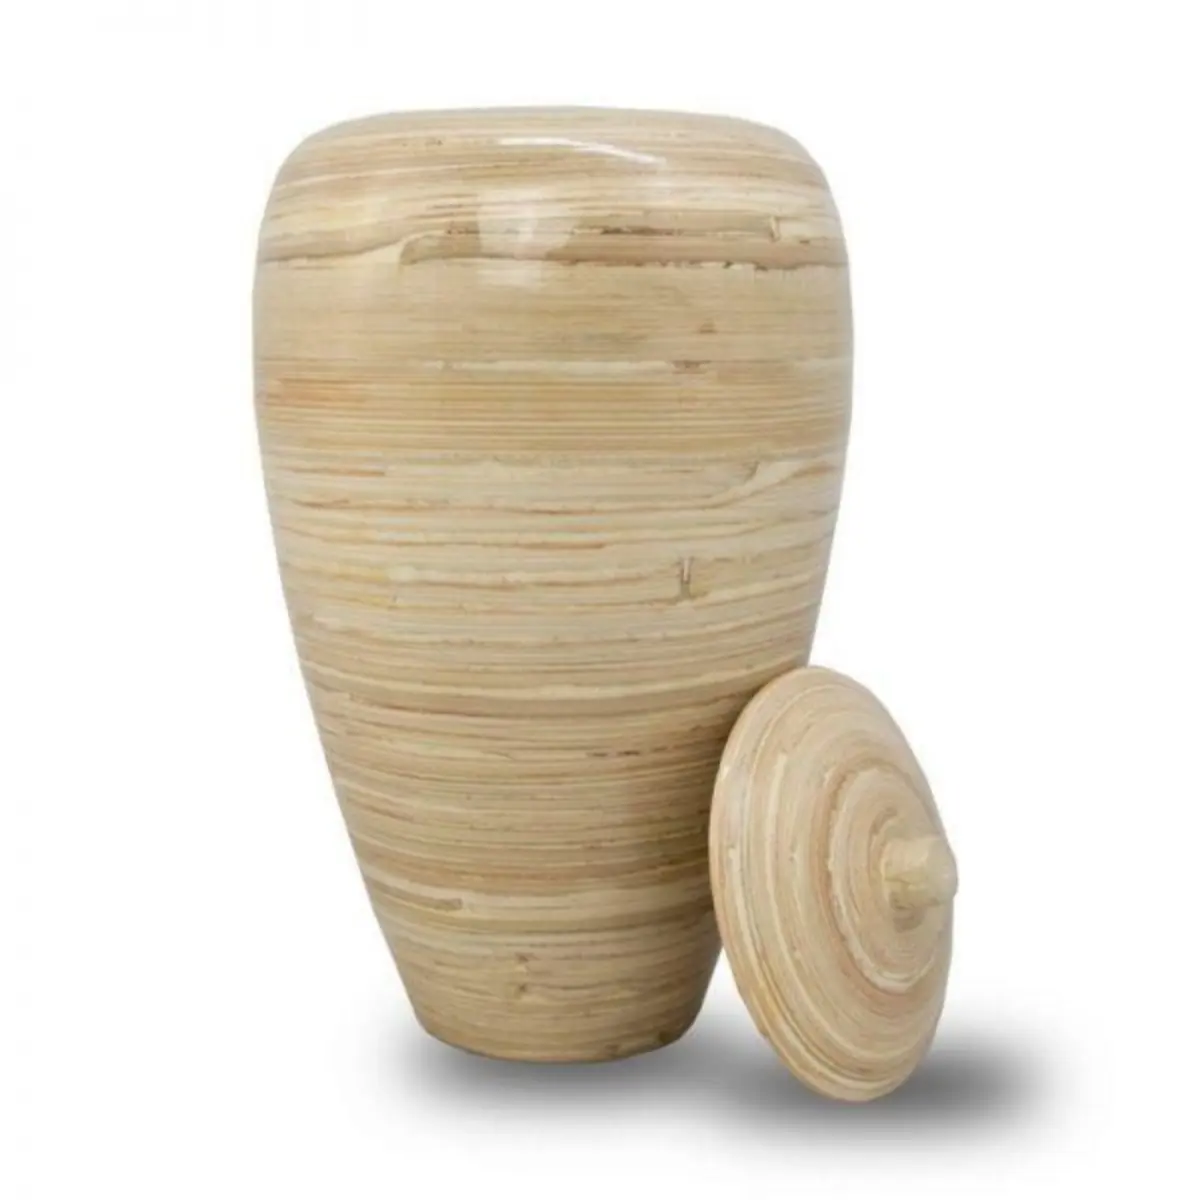 Wholesaler Manufacture spun bamboo cremation urn for ashes ODM bamboo urn Decorative from Vietnam